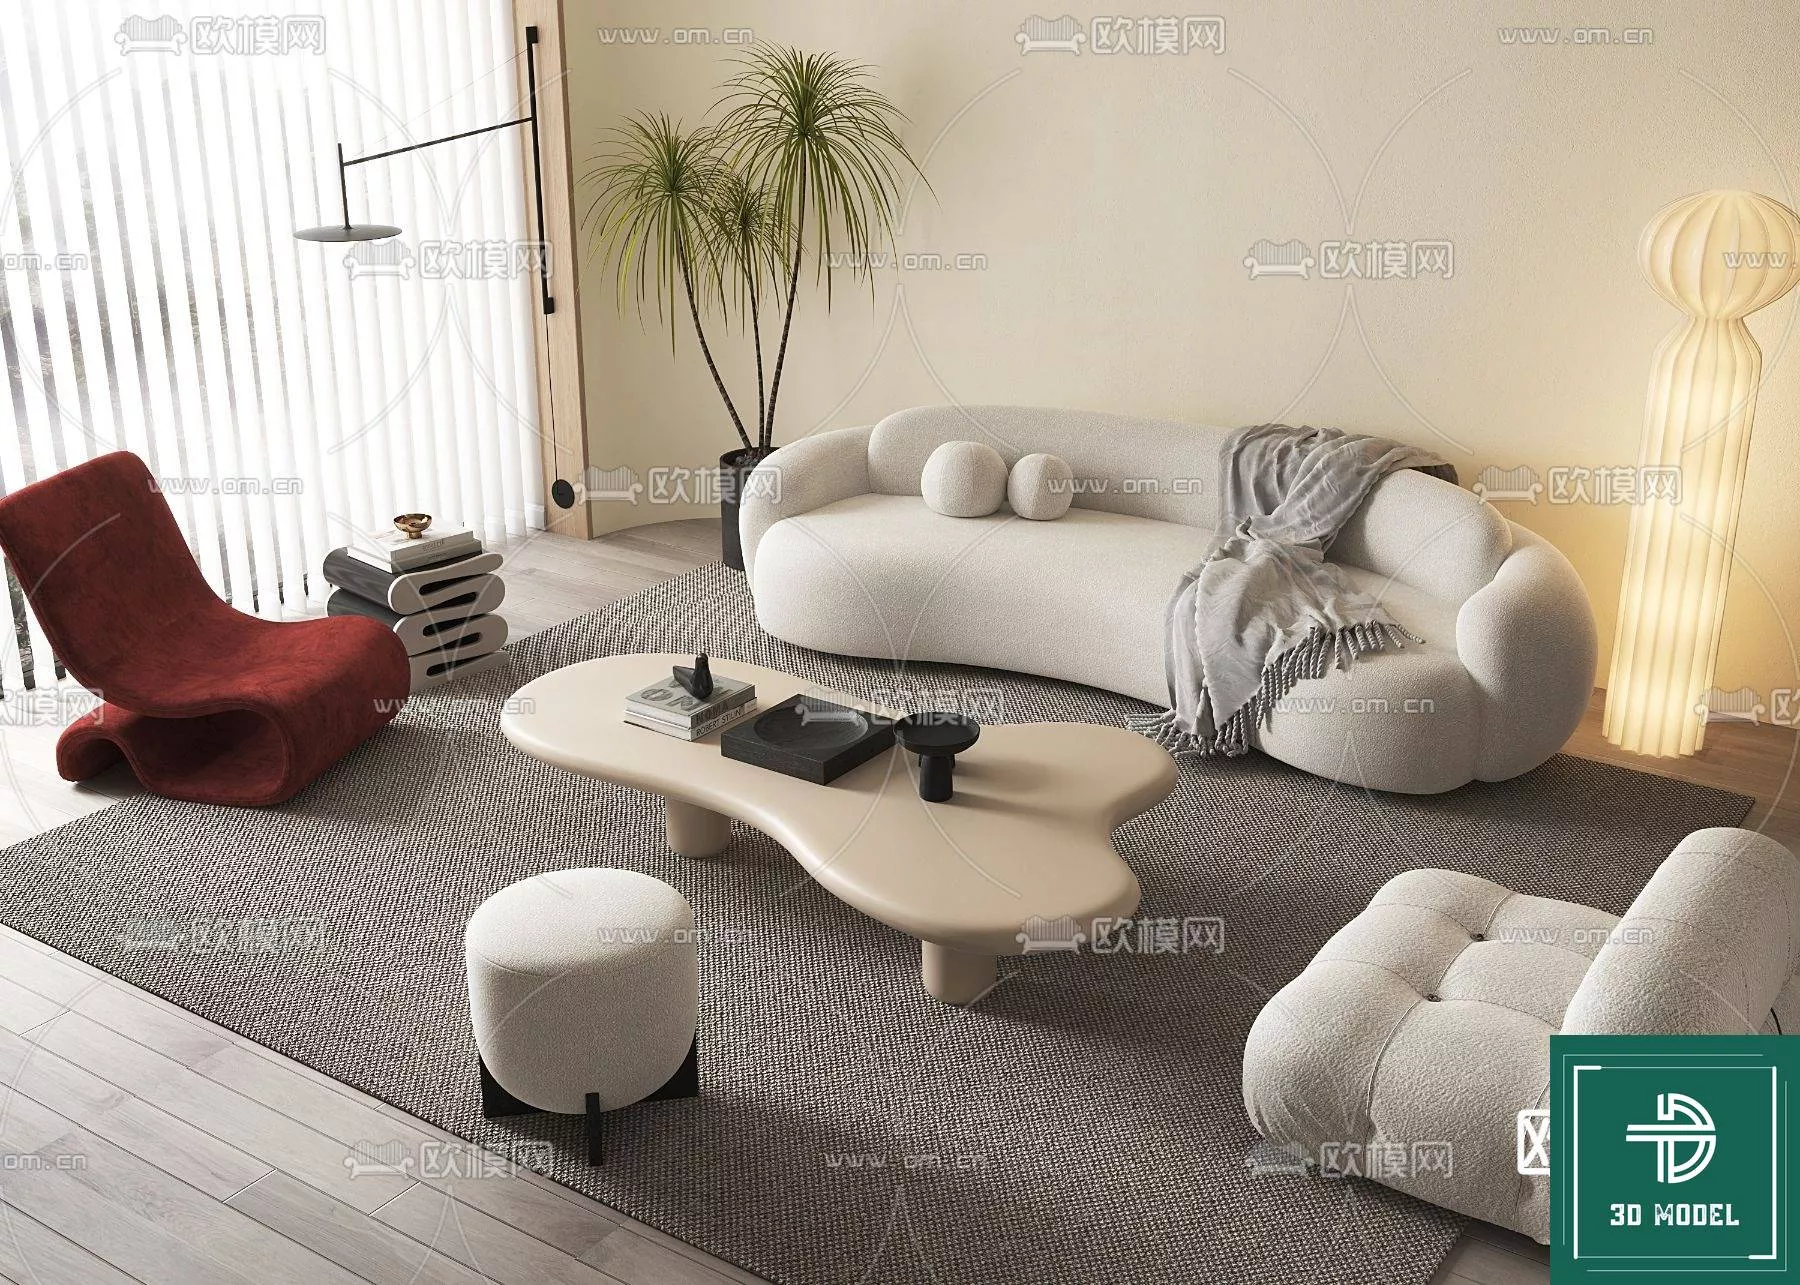 MODERN SOFA - SKETCHUP 3D MODEL - VRAY OR ENSCAPE - ID13293